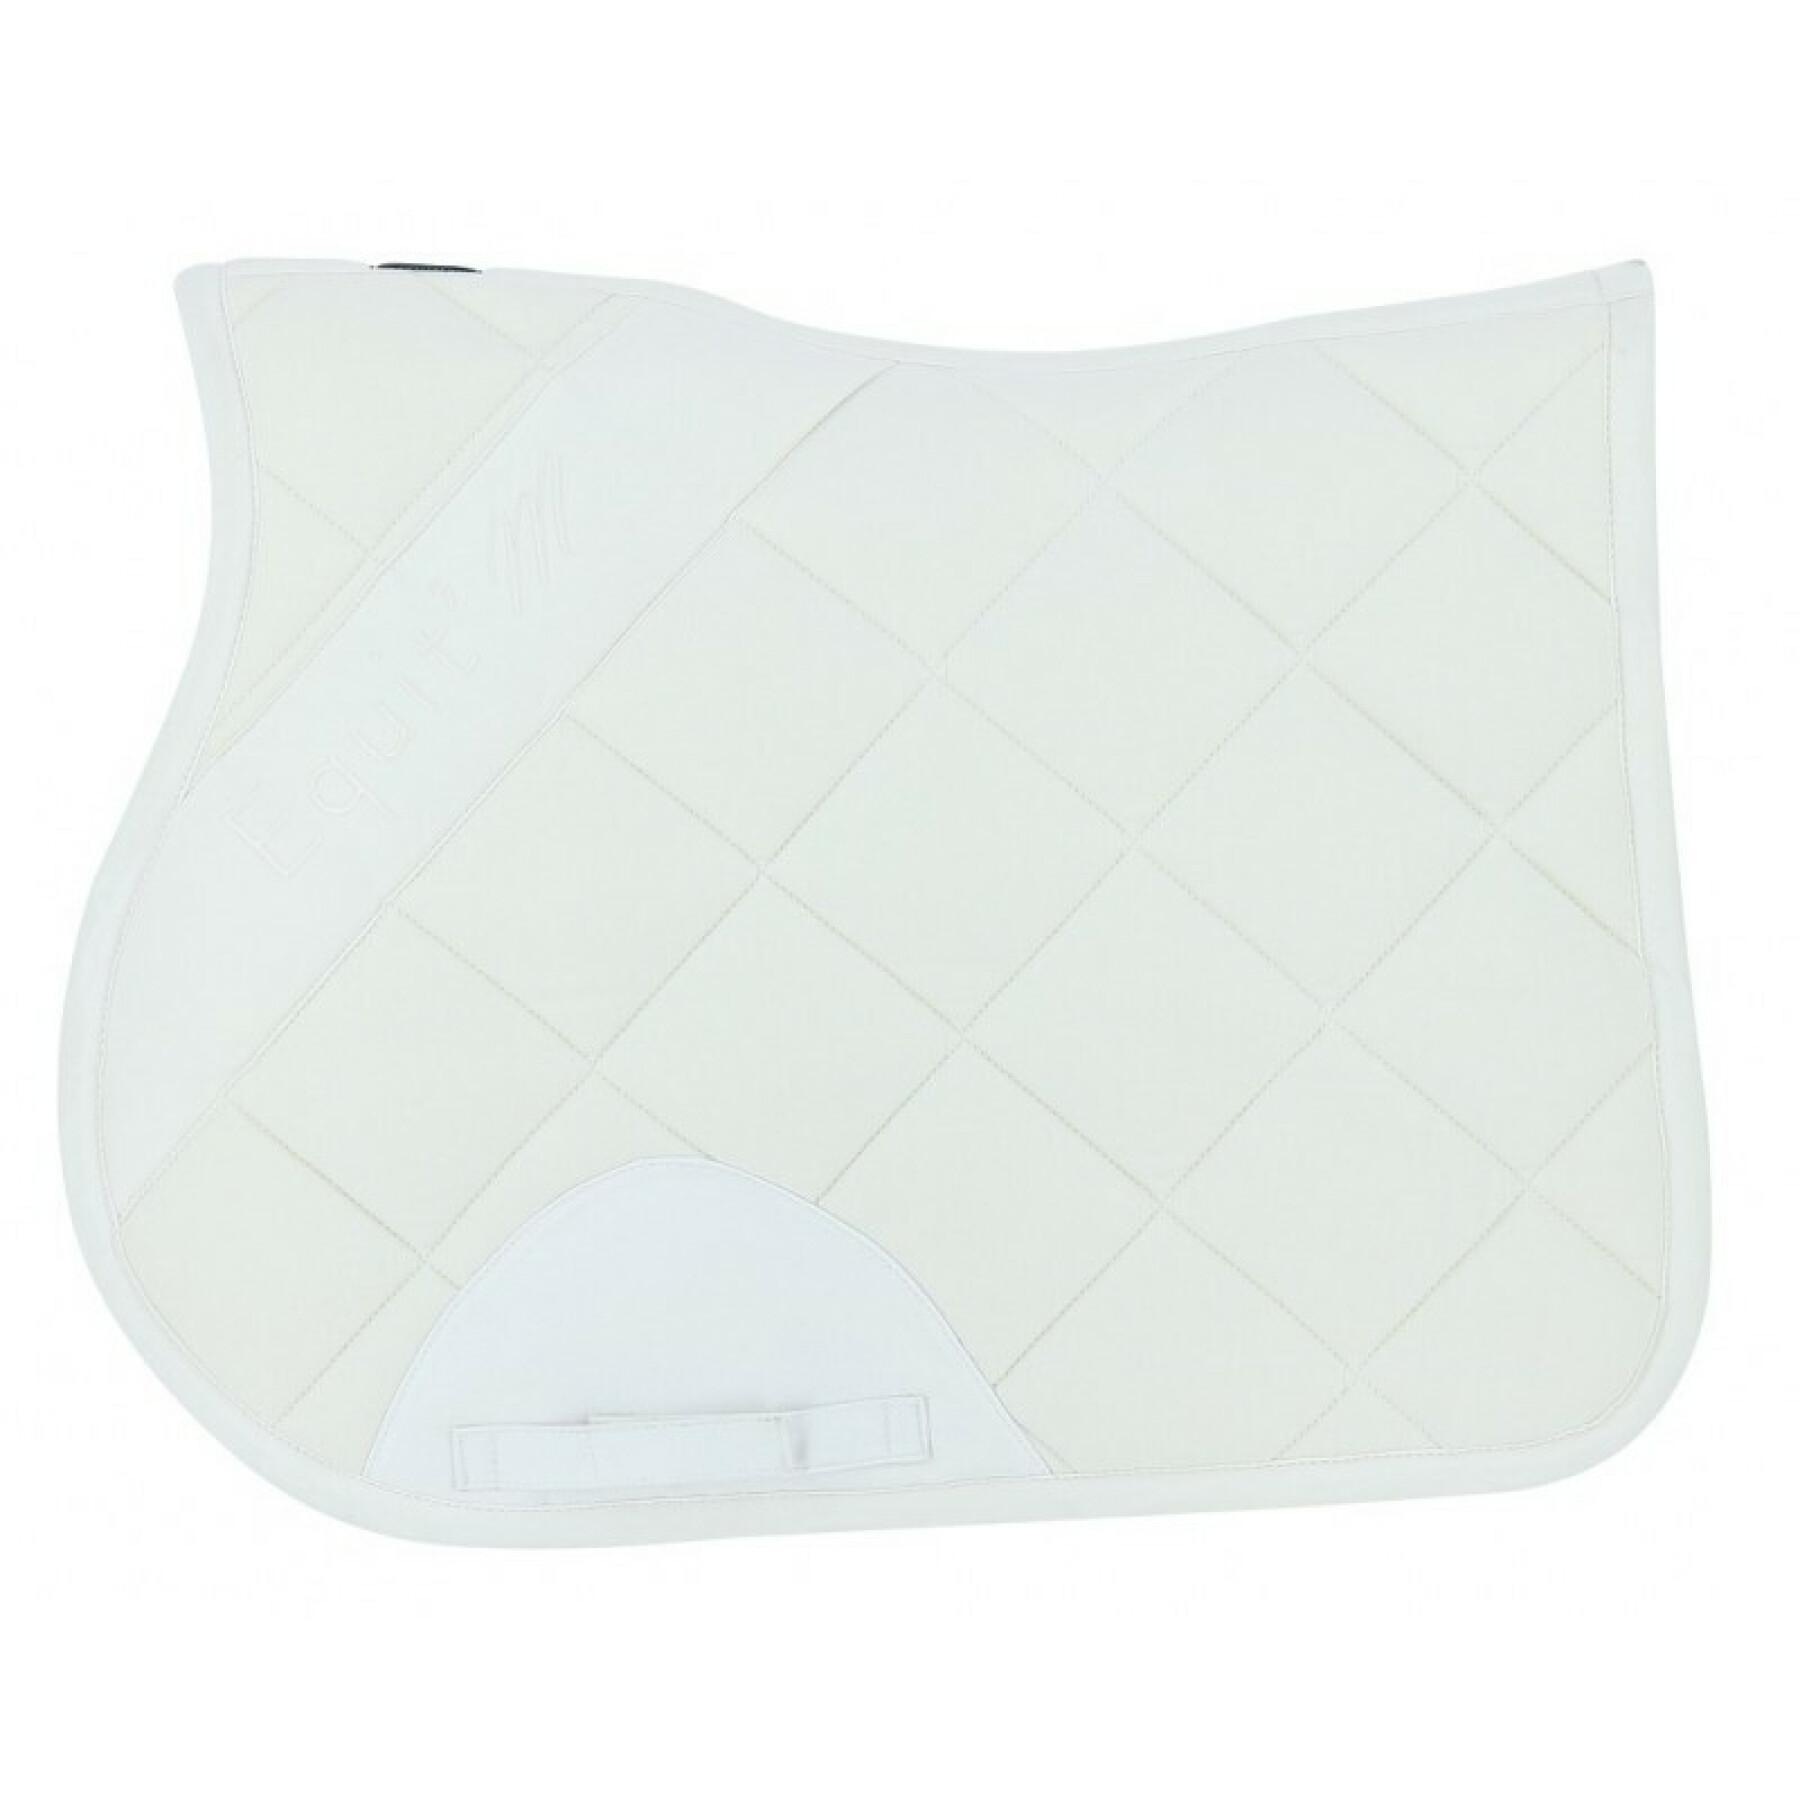 Saddle pad for horses Equithème Pro